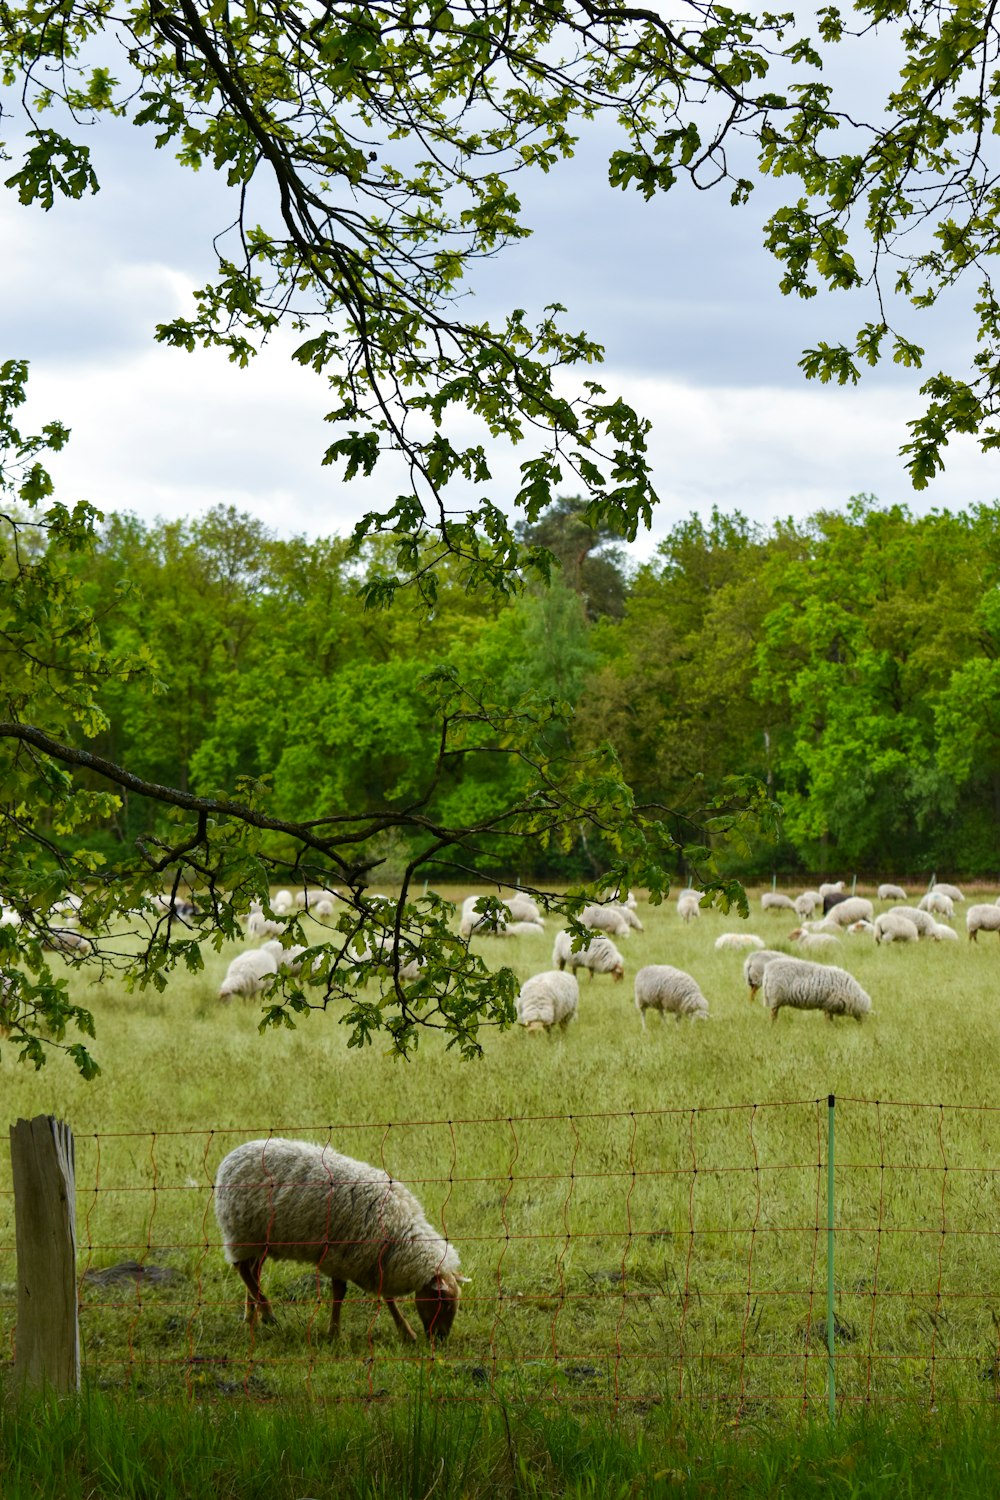 herd of sheep on green grass field during daytime